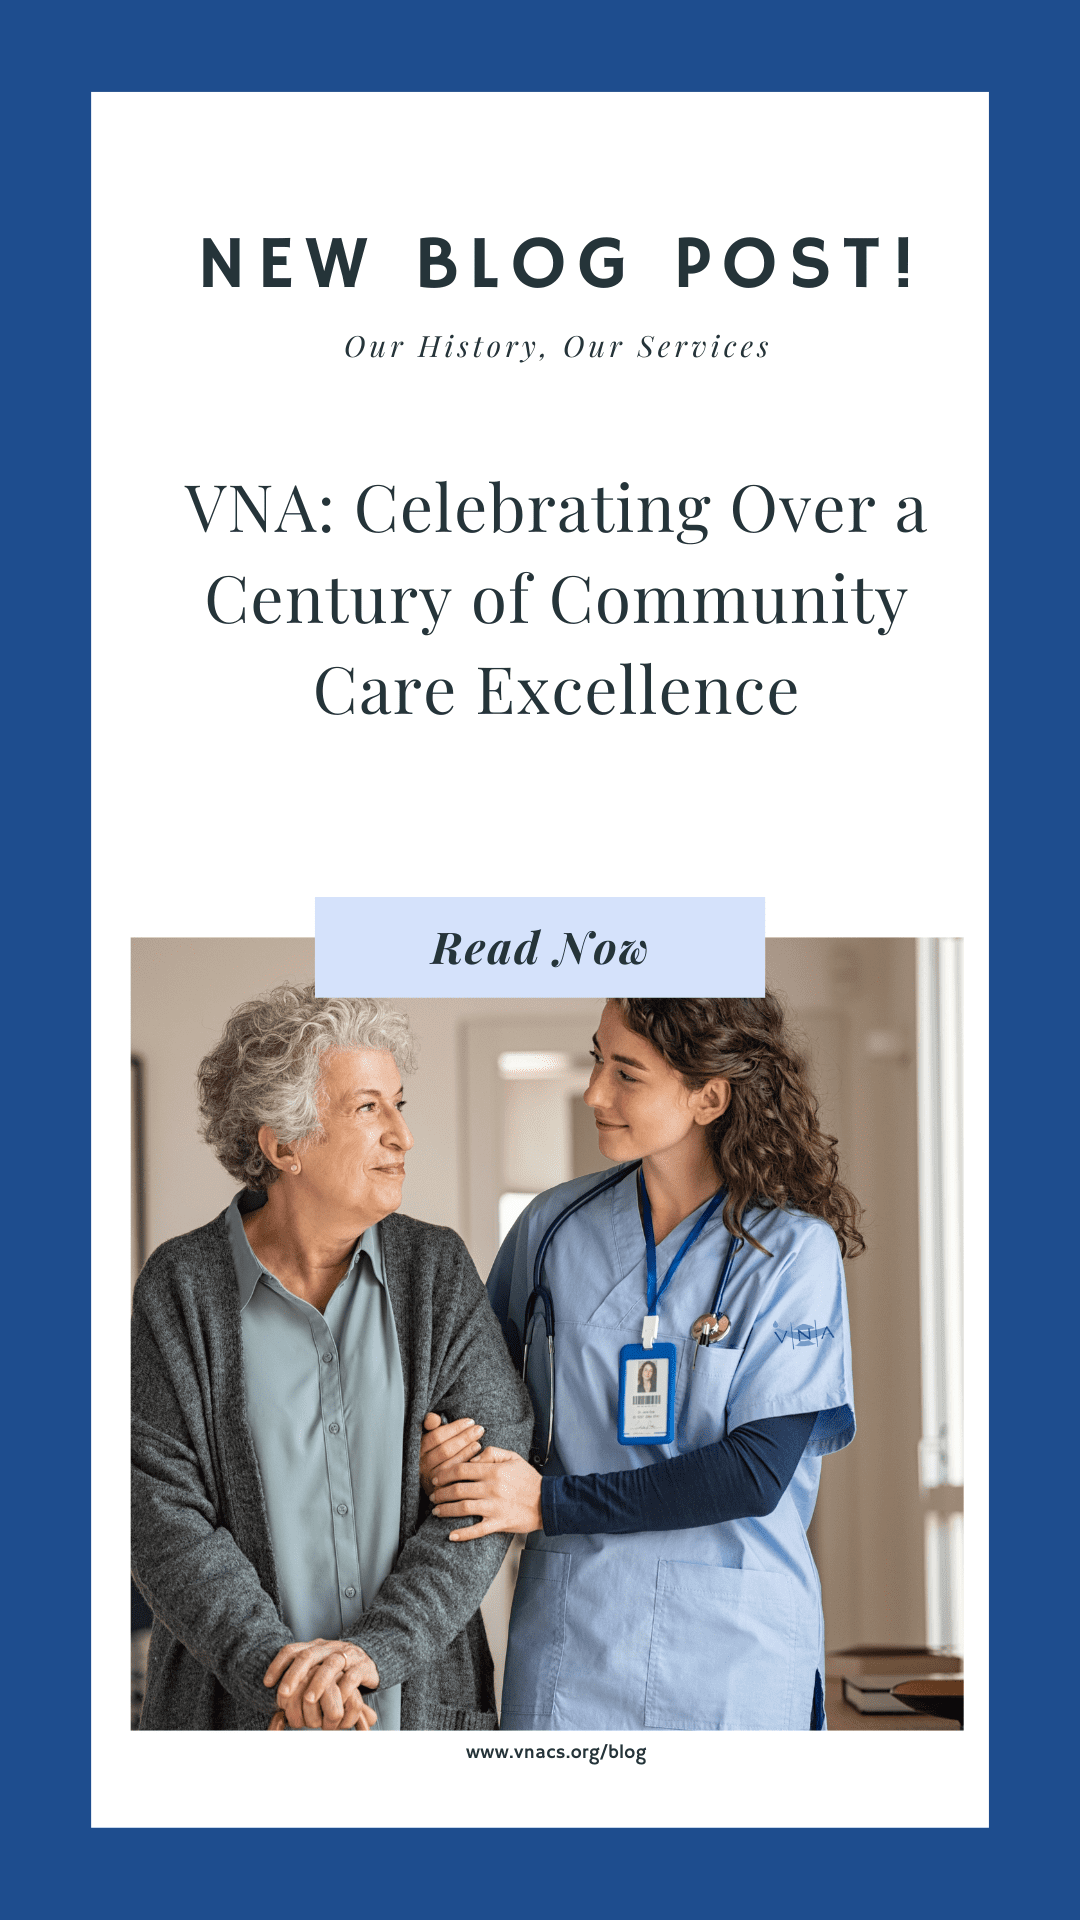 VNA: Celebrating Over a Century of Community Care Excellence